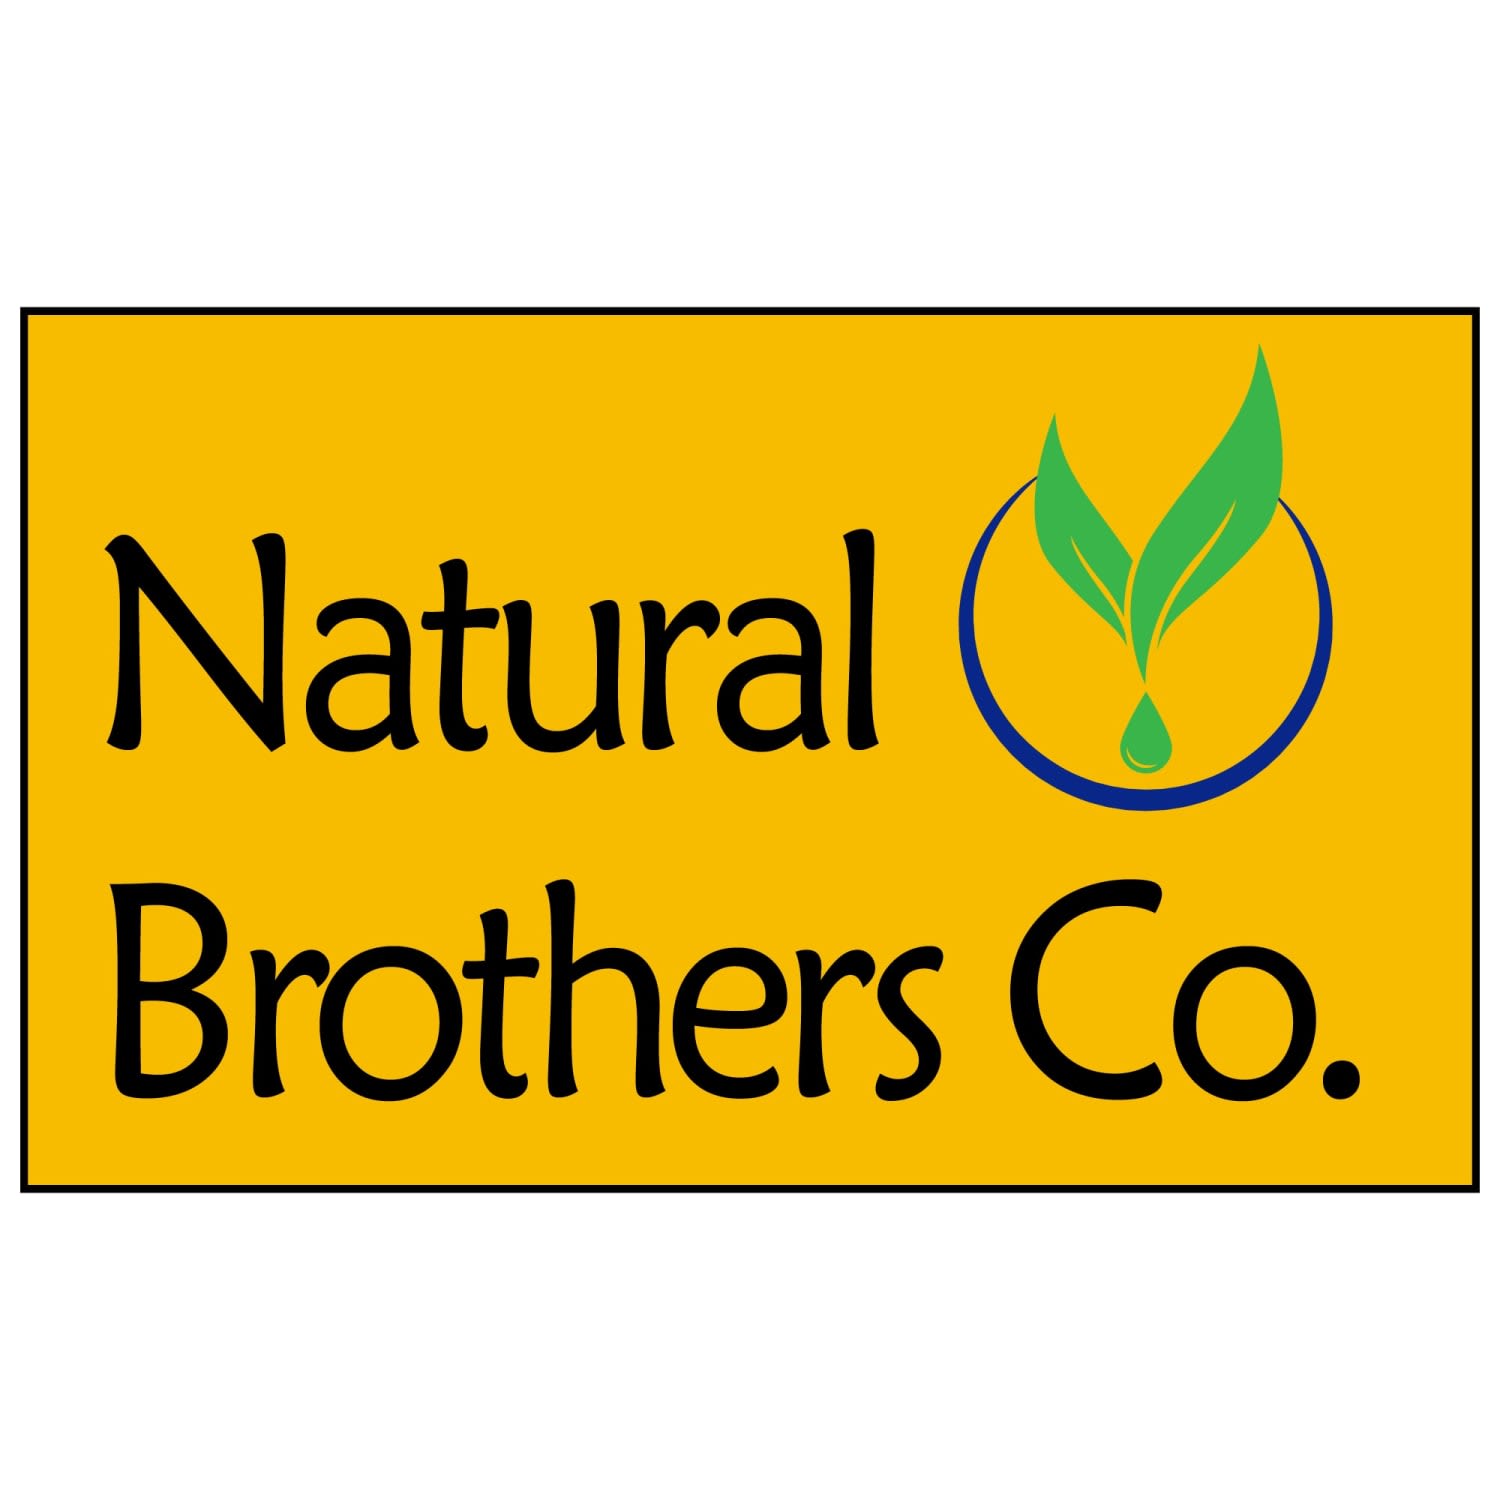 Natural Brothers Co.